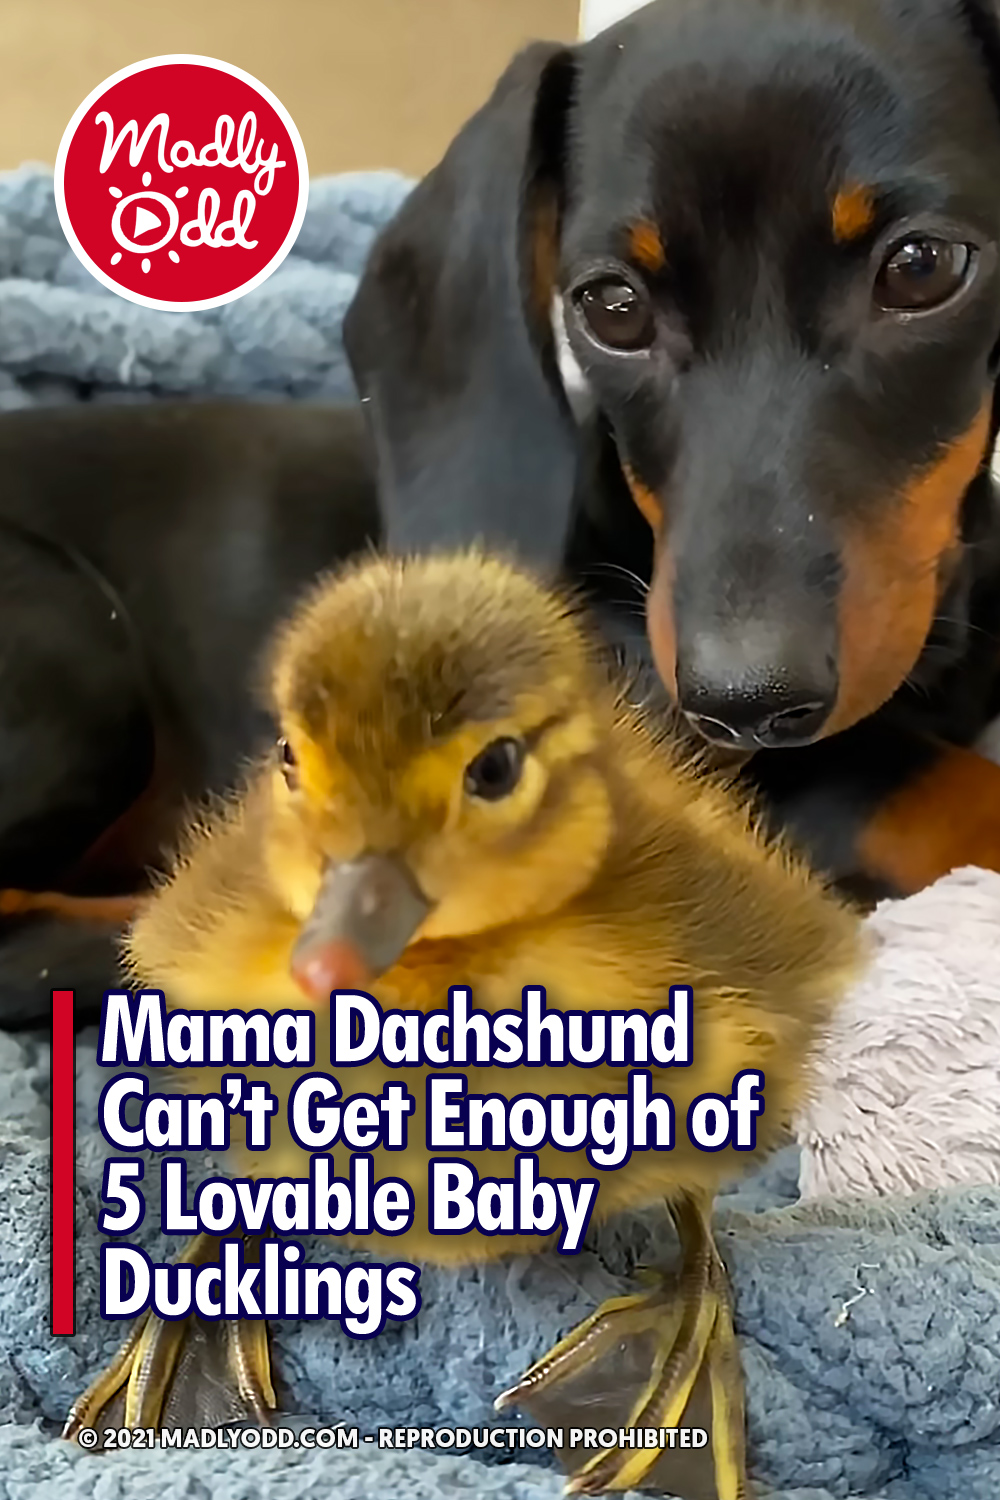 Mama Dachshund Can’t Get Enough of 5 Lovable Baby Ducklings